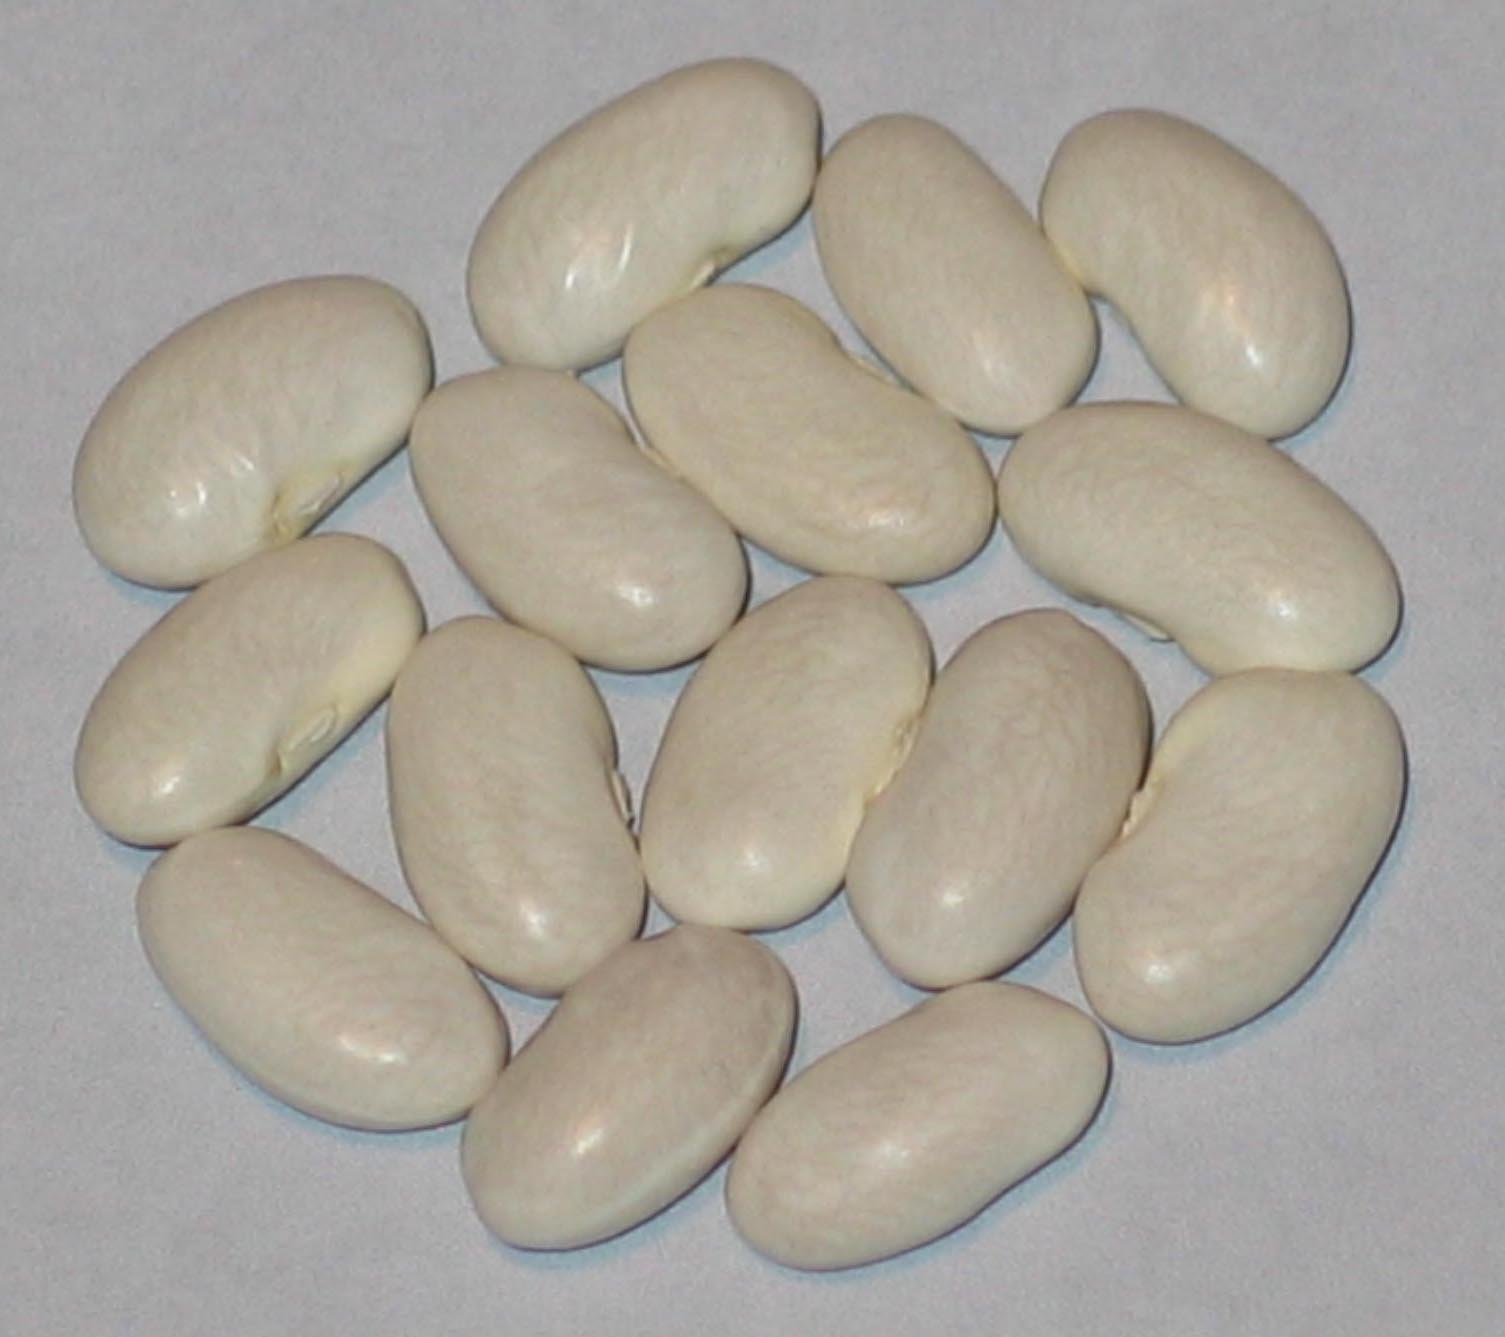 image of Barry Island beans